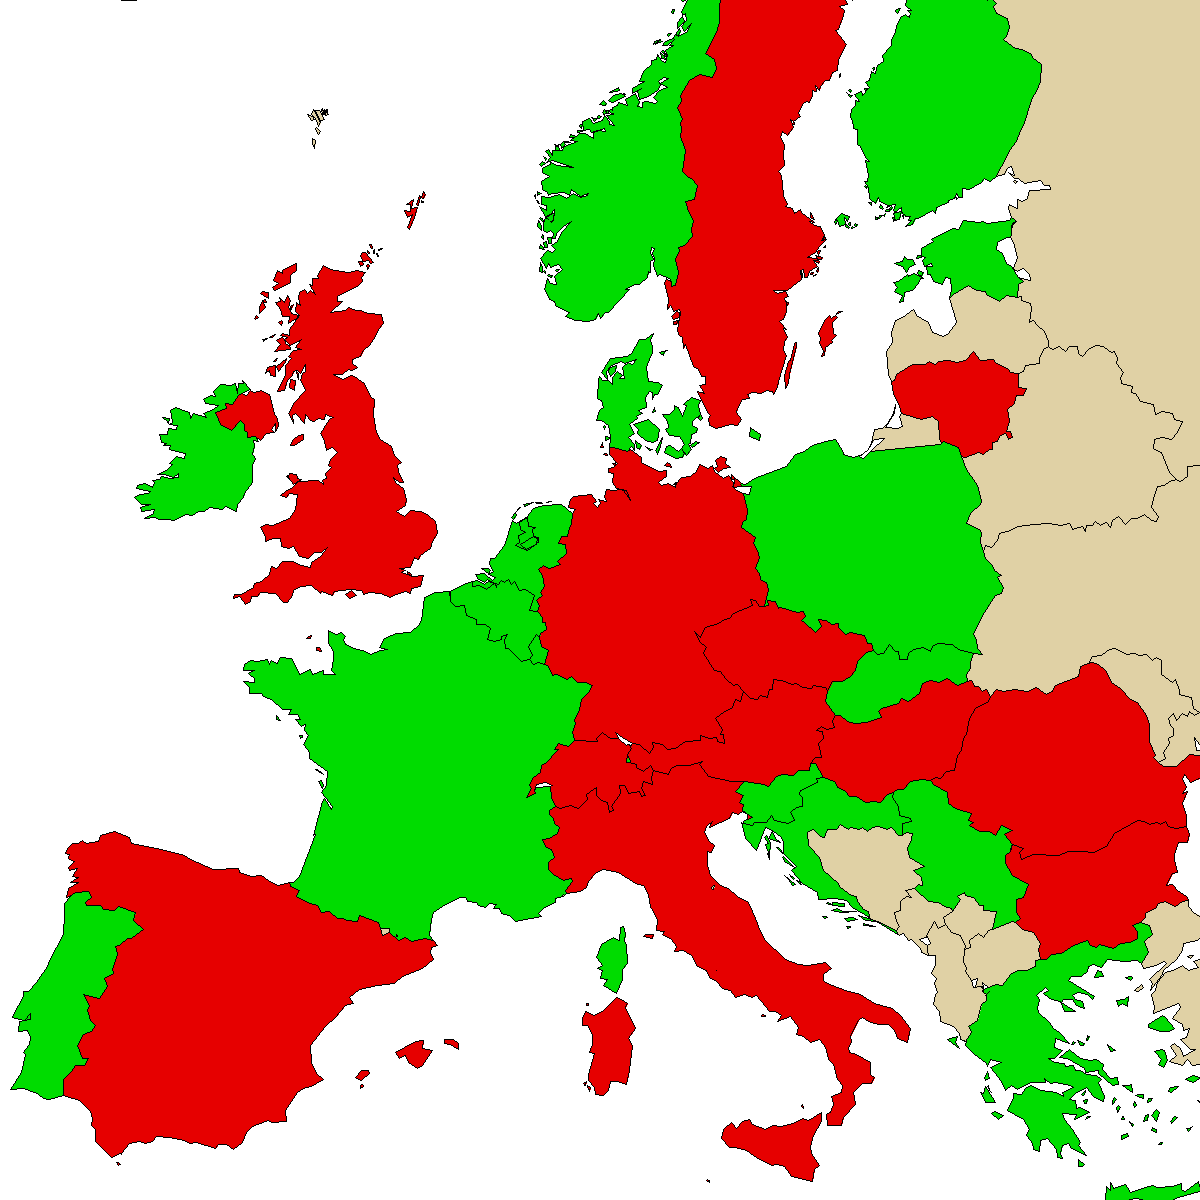 legal info map for our product 2FDCK, green are countries where we found no ban, red with ban, grey is unknown